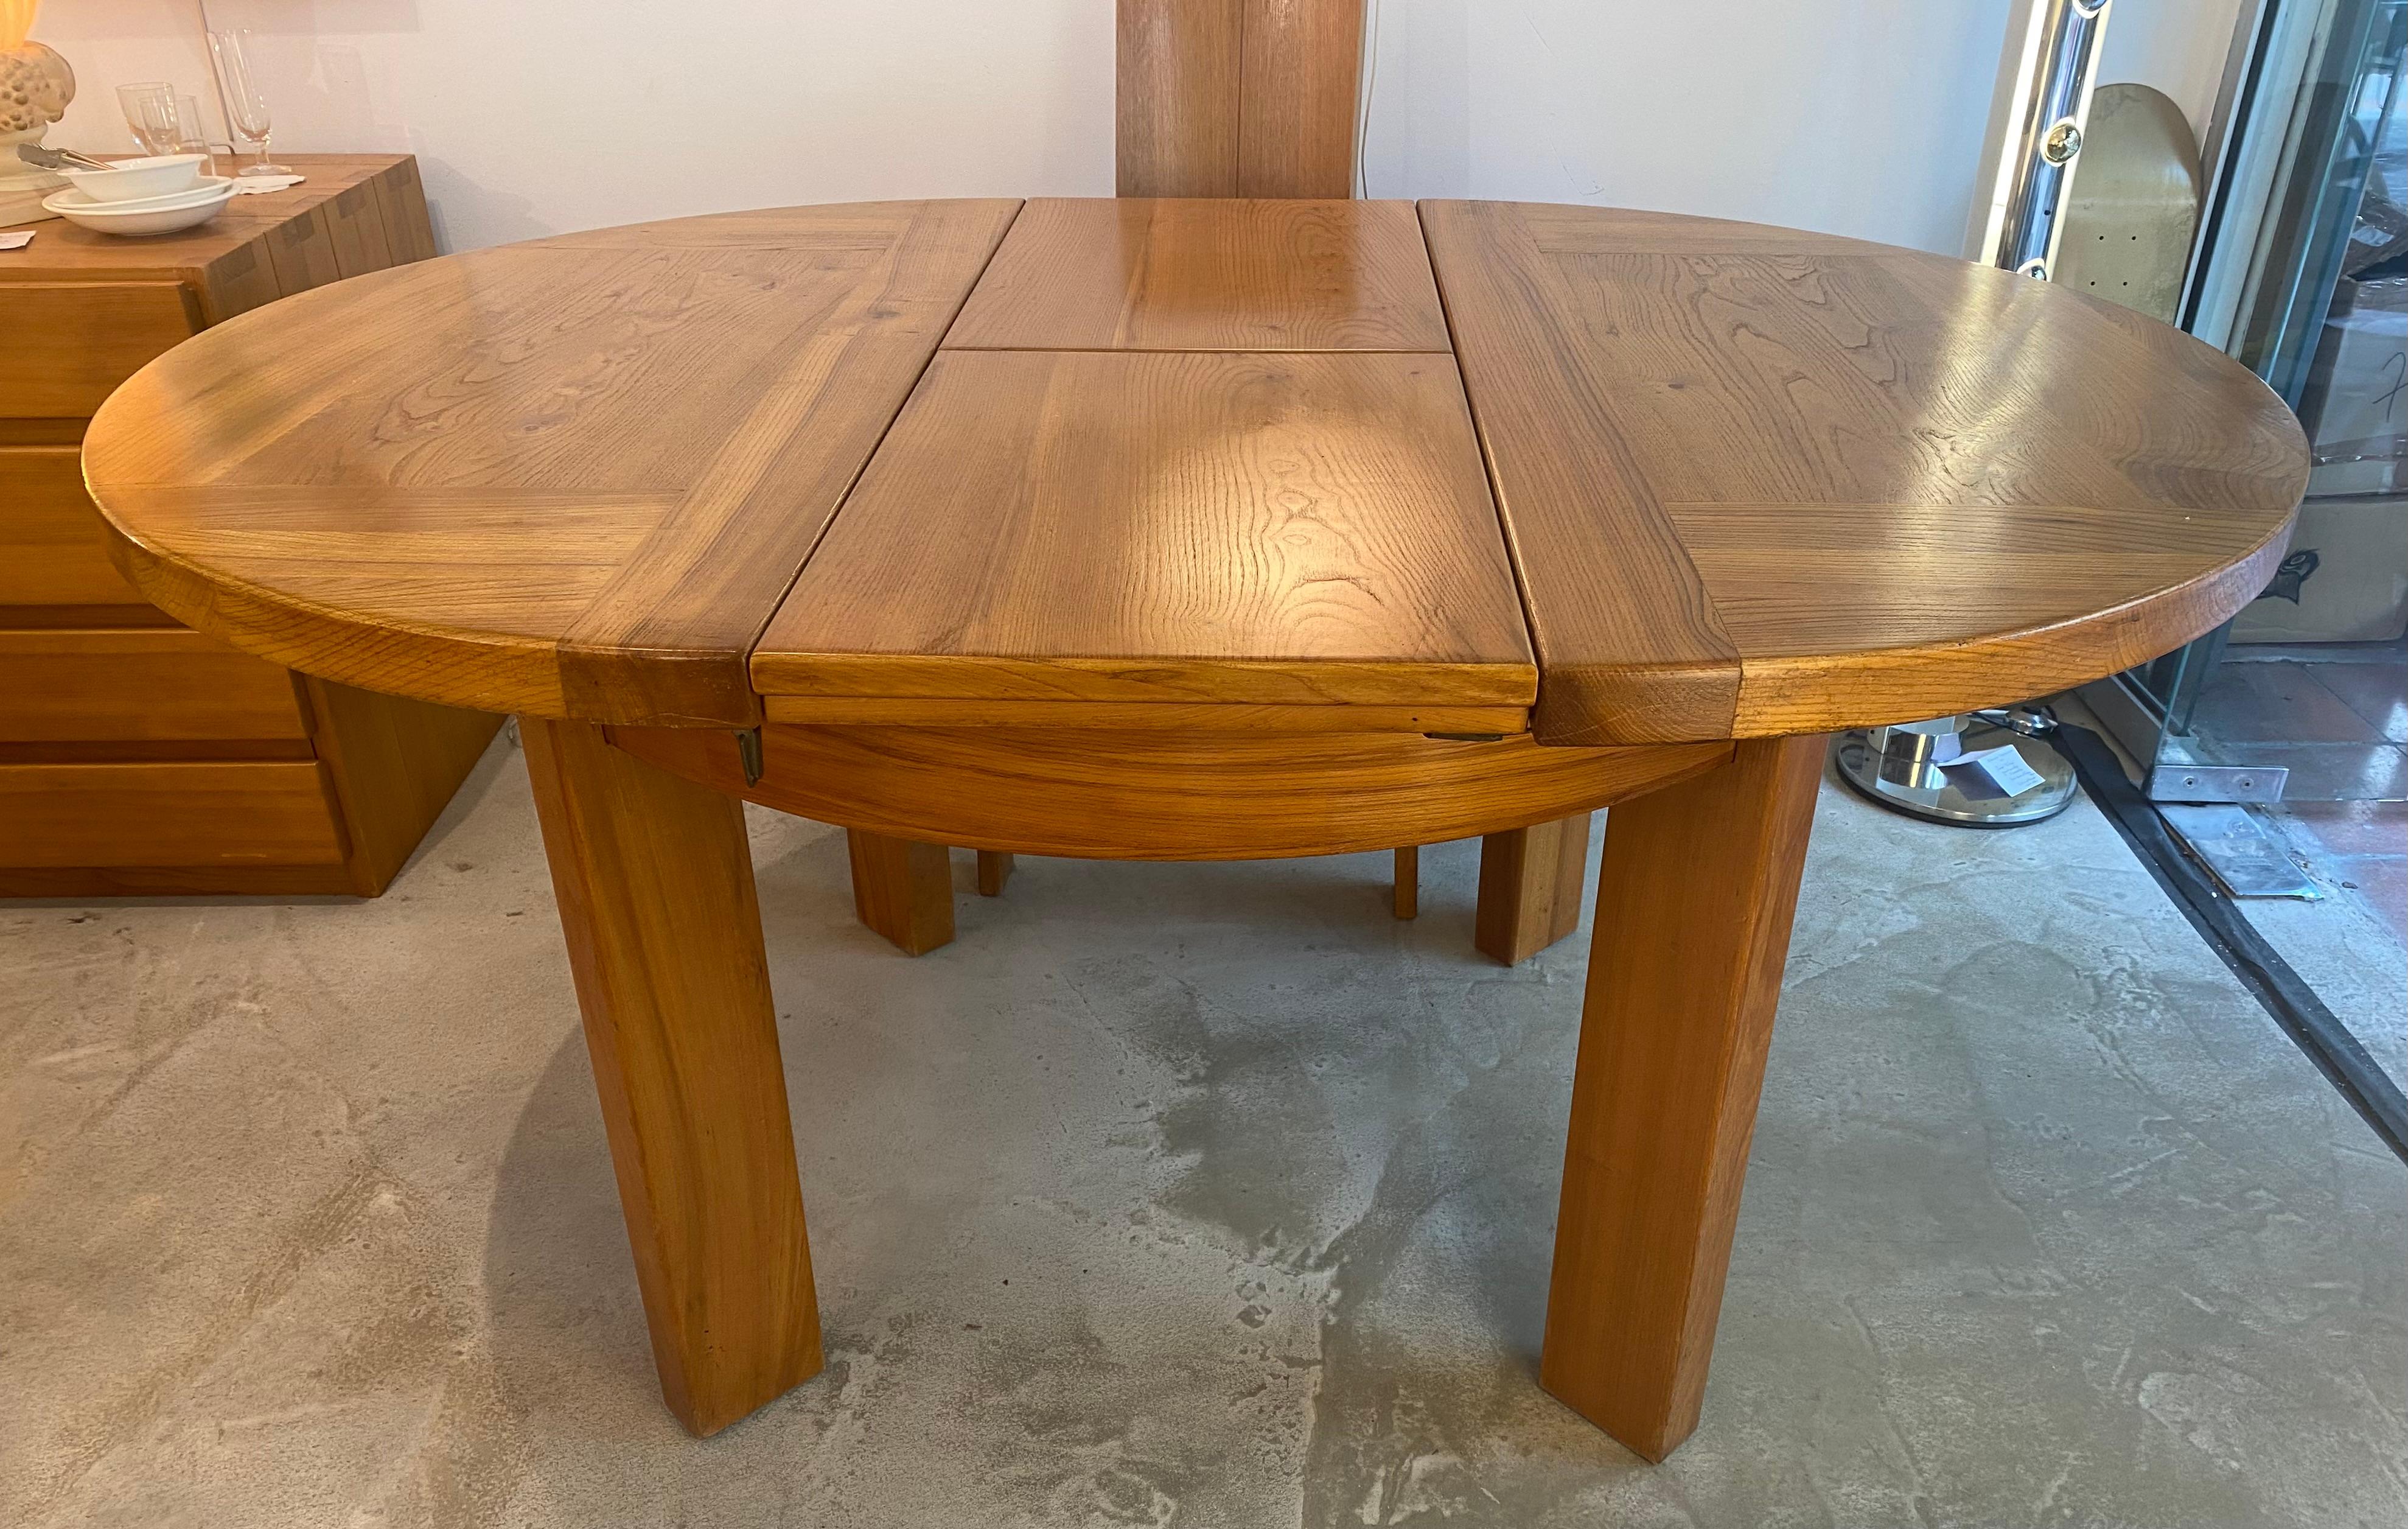 Dining table - Regain
Elm

Has an extension in its center

Dimensions open: L156xD116xH76cm

Dimensions closed: L117xD117xH76cm

1978.